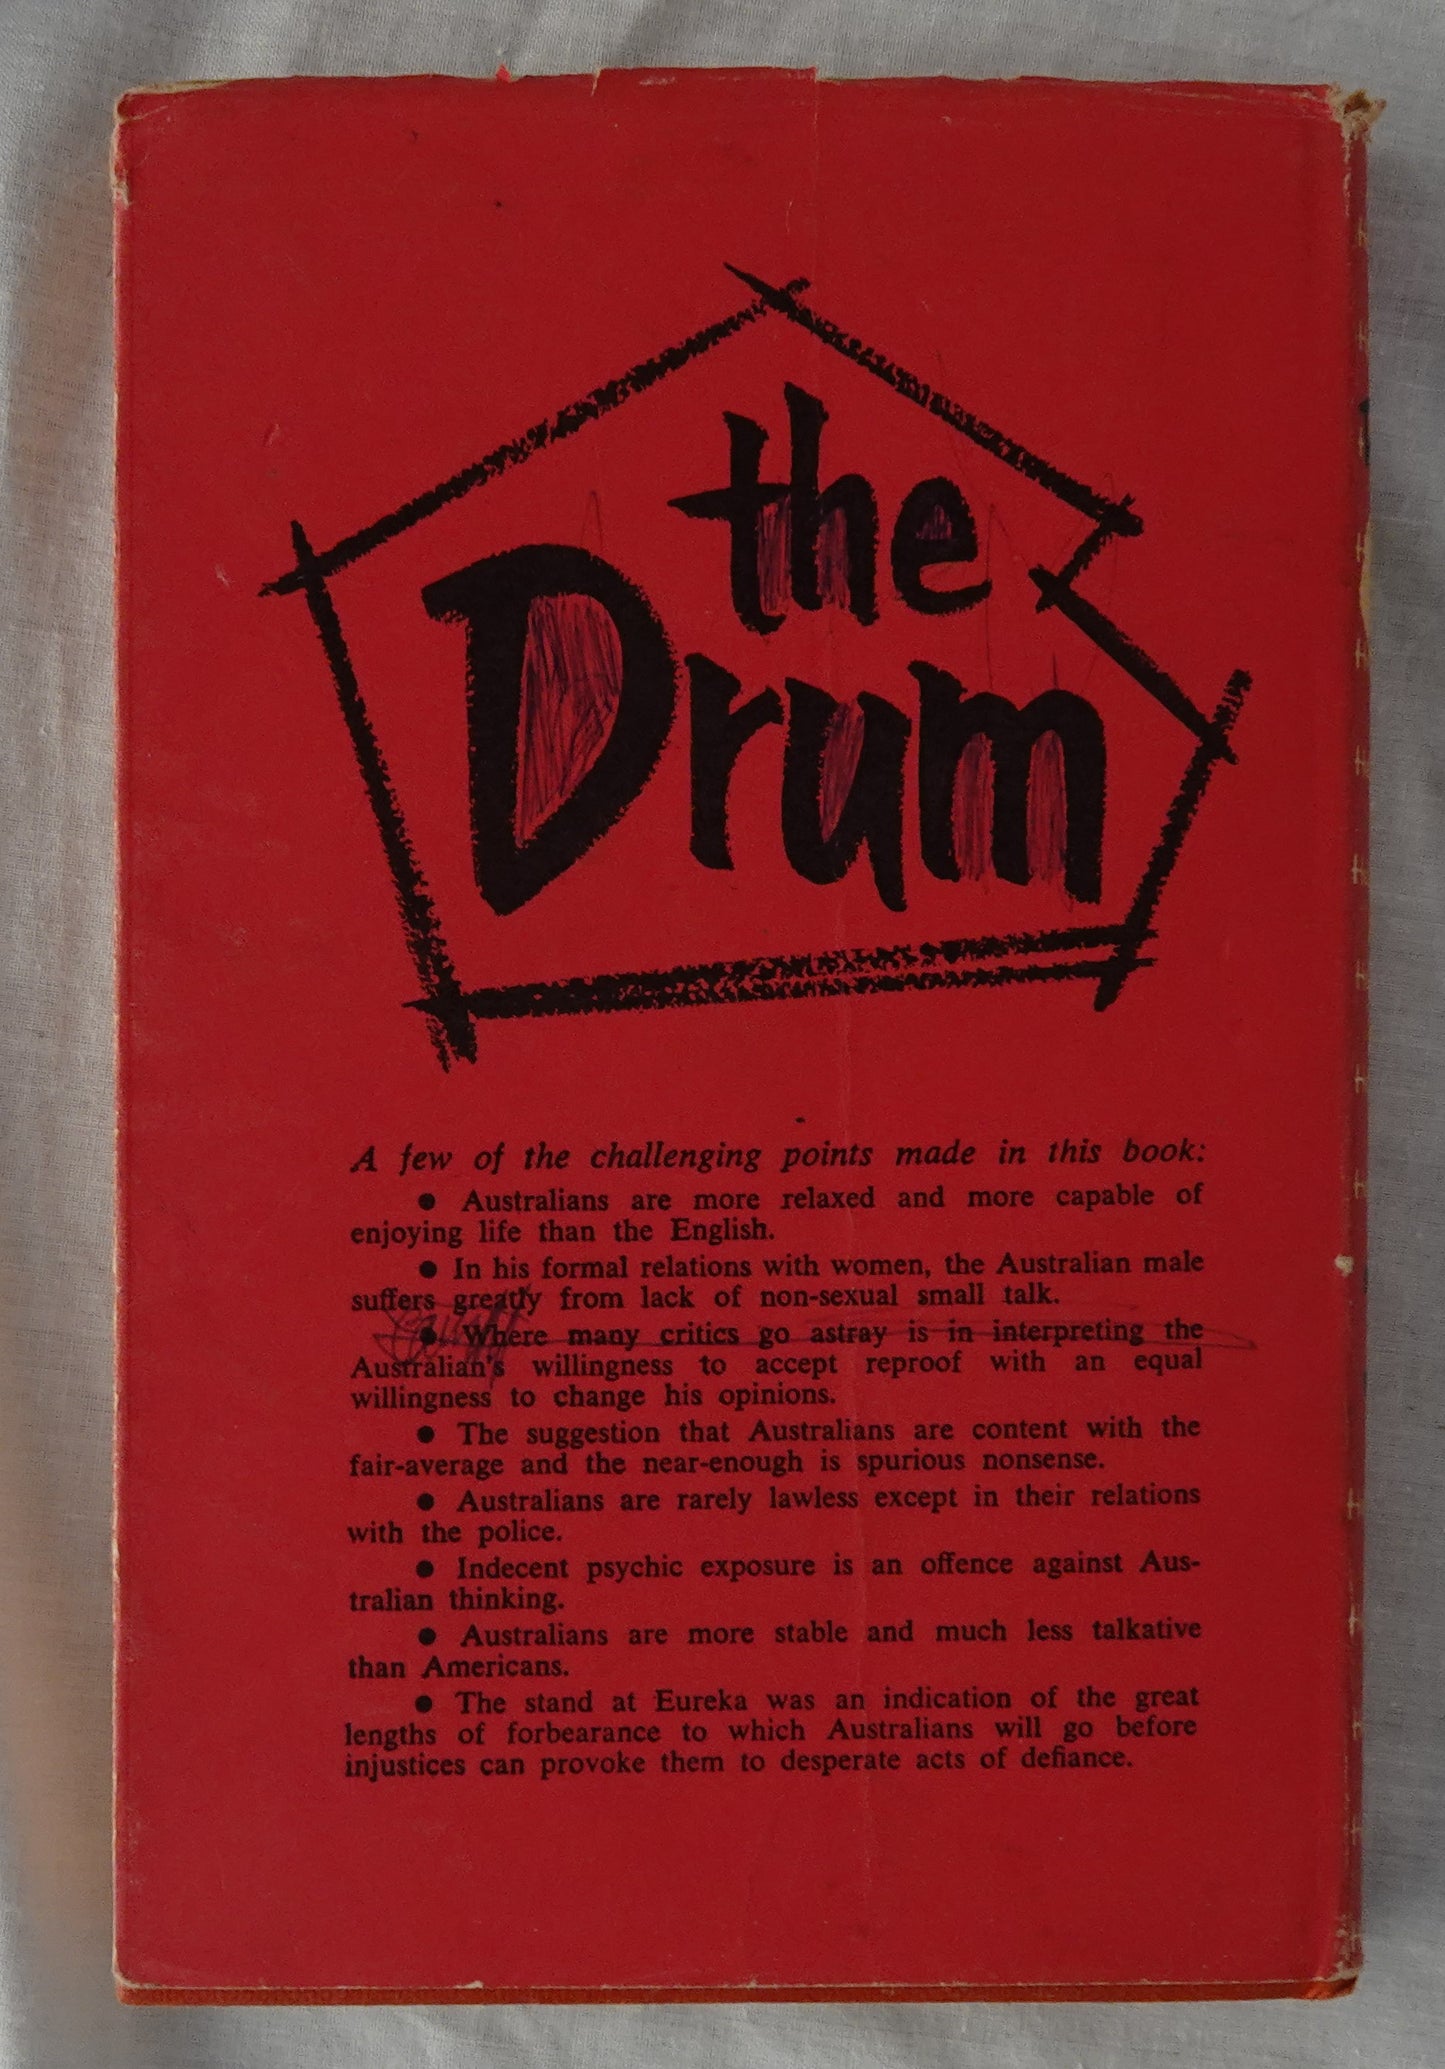 The Drum by Sidney J. Baker